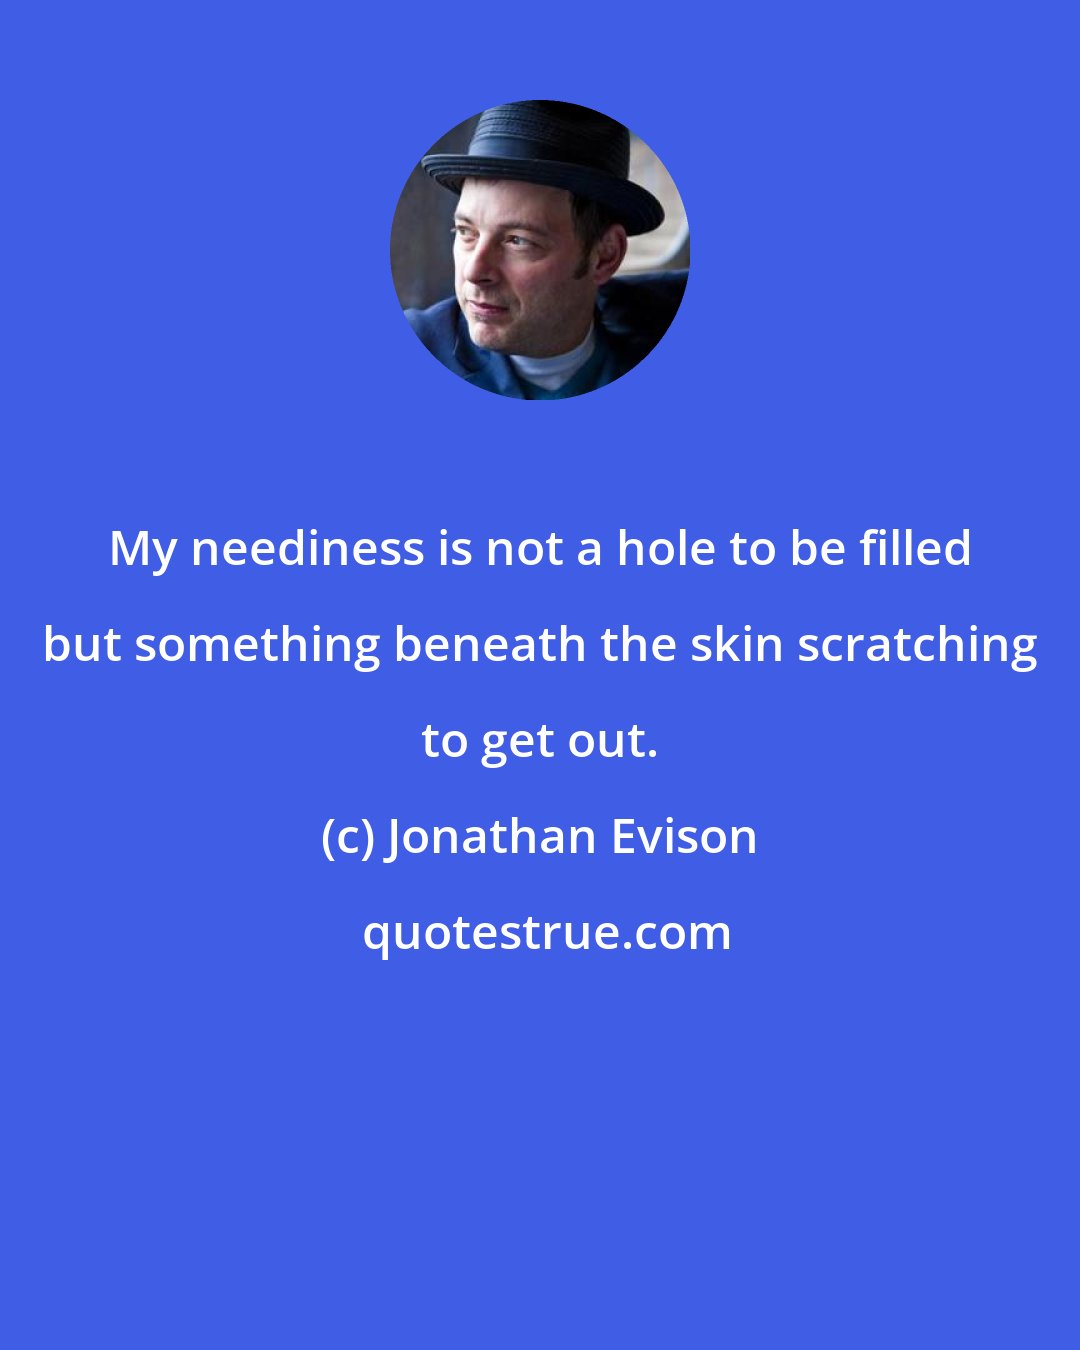 Jonathan Evison: My neediness is not a hole to be filled but something beneath the skin scratching to get out.